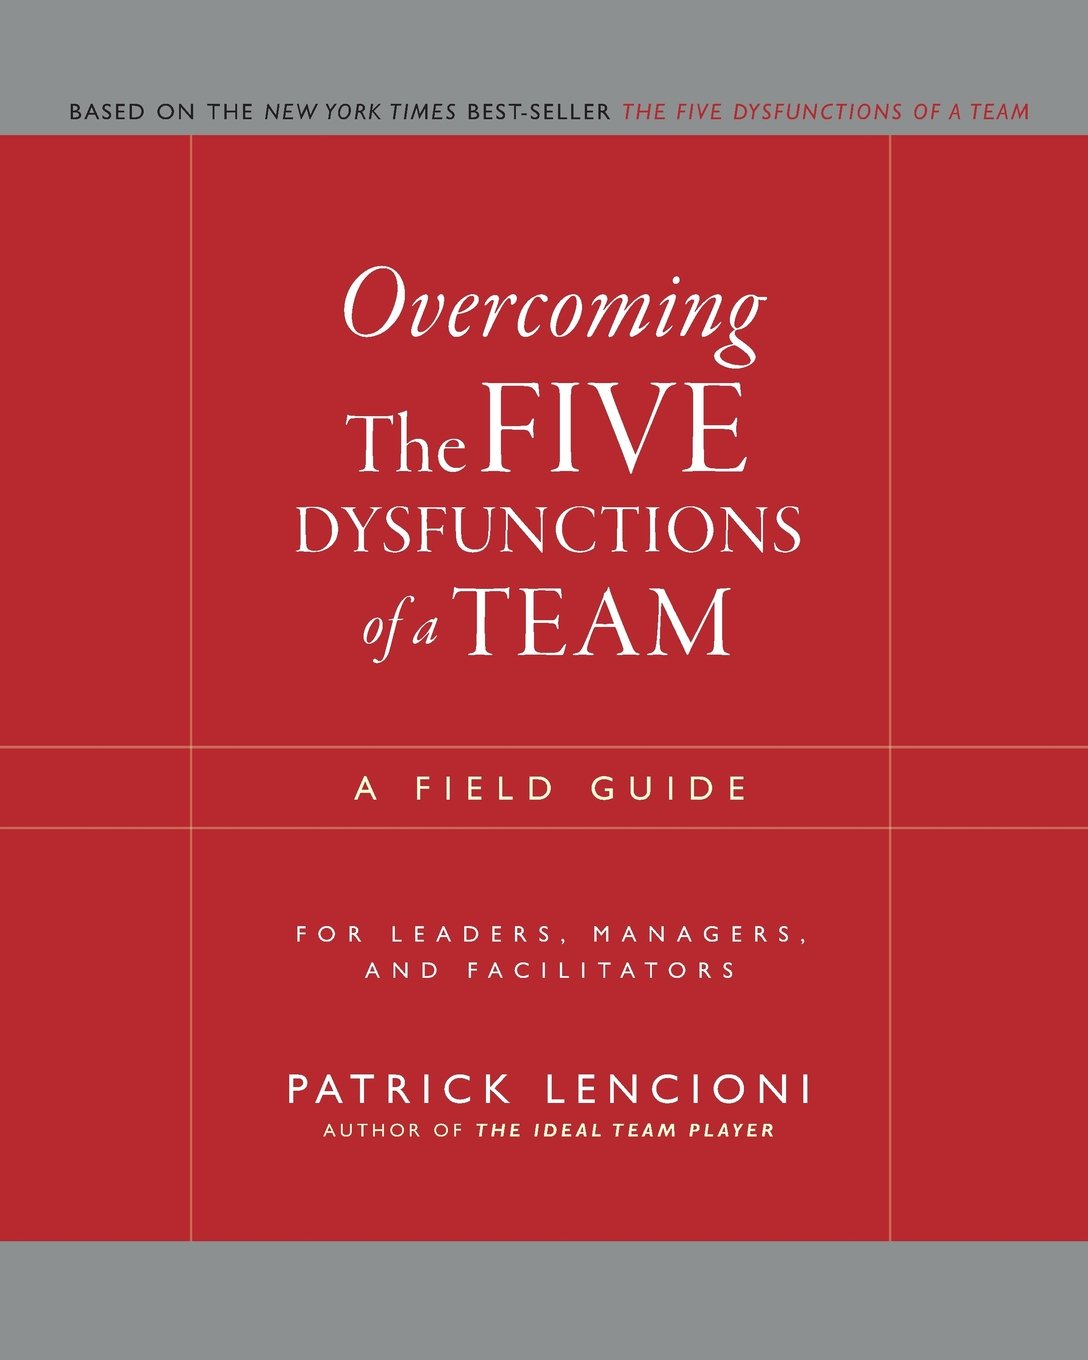 Overcoming The Five Dysfunctions of a Team by Patrick Lencioni (Author)